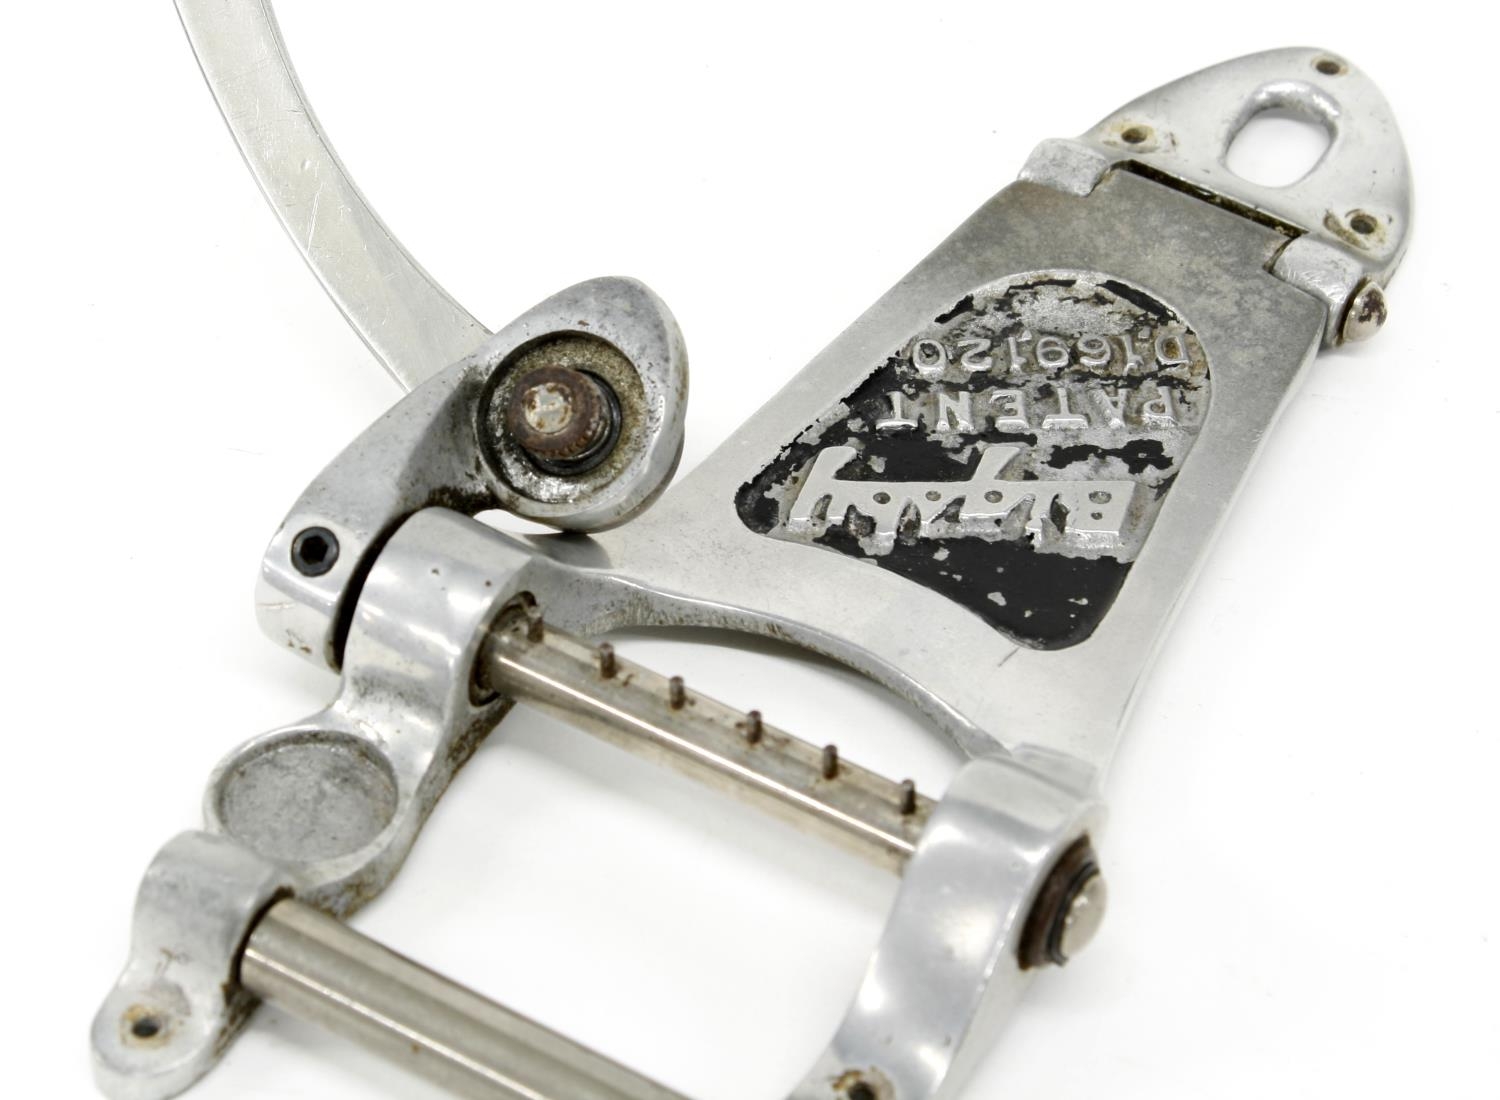 1960s Bigsby B7 guitar vibrato tailpiece - Image 3 of 3